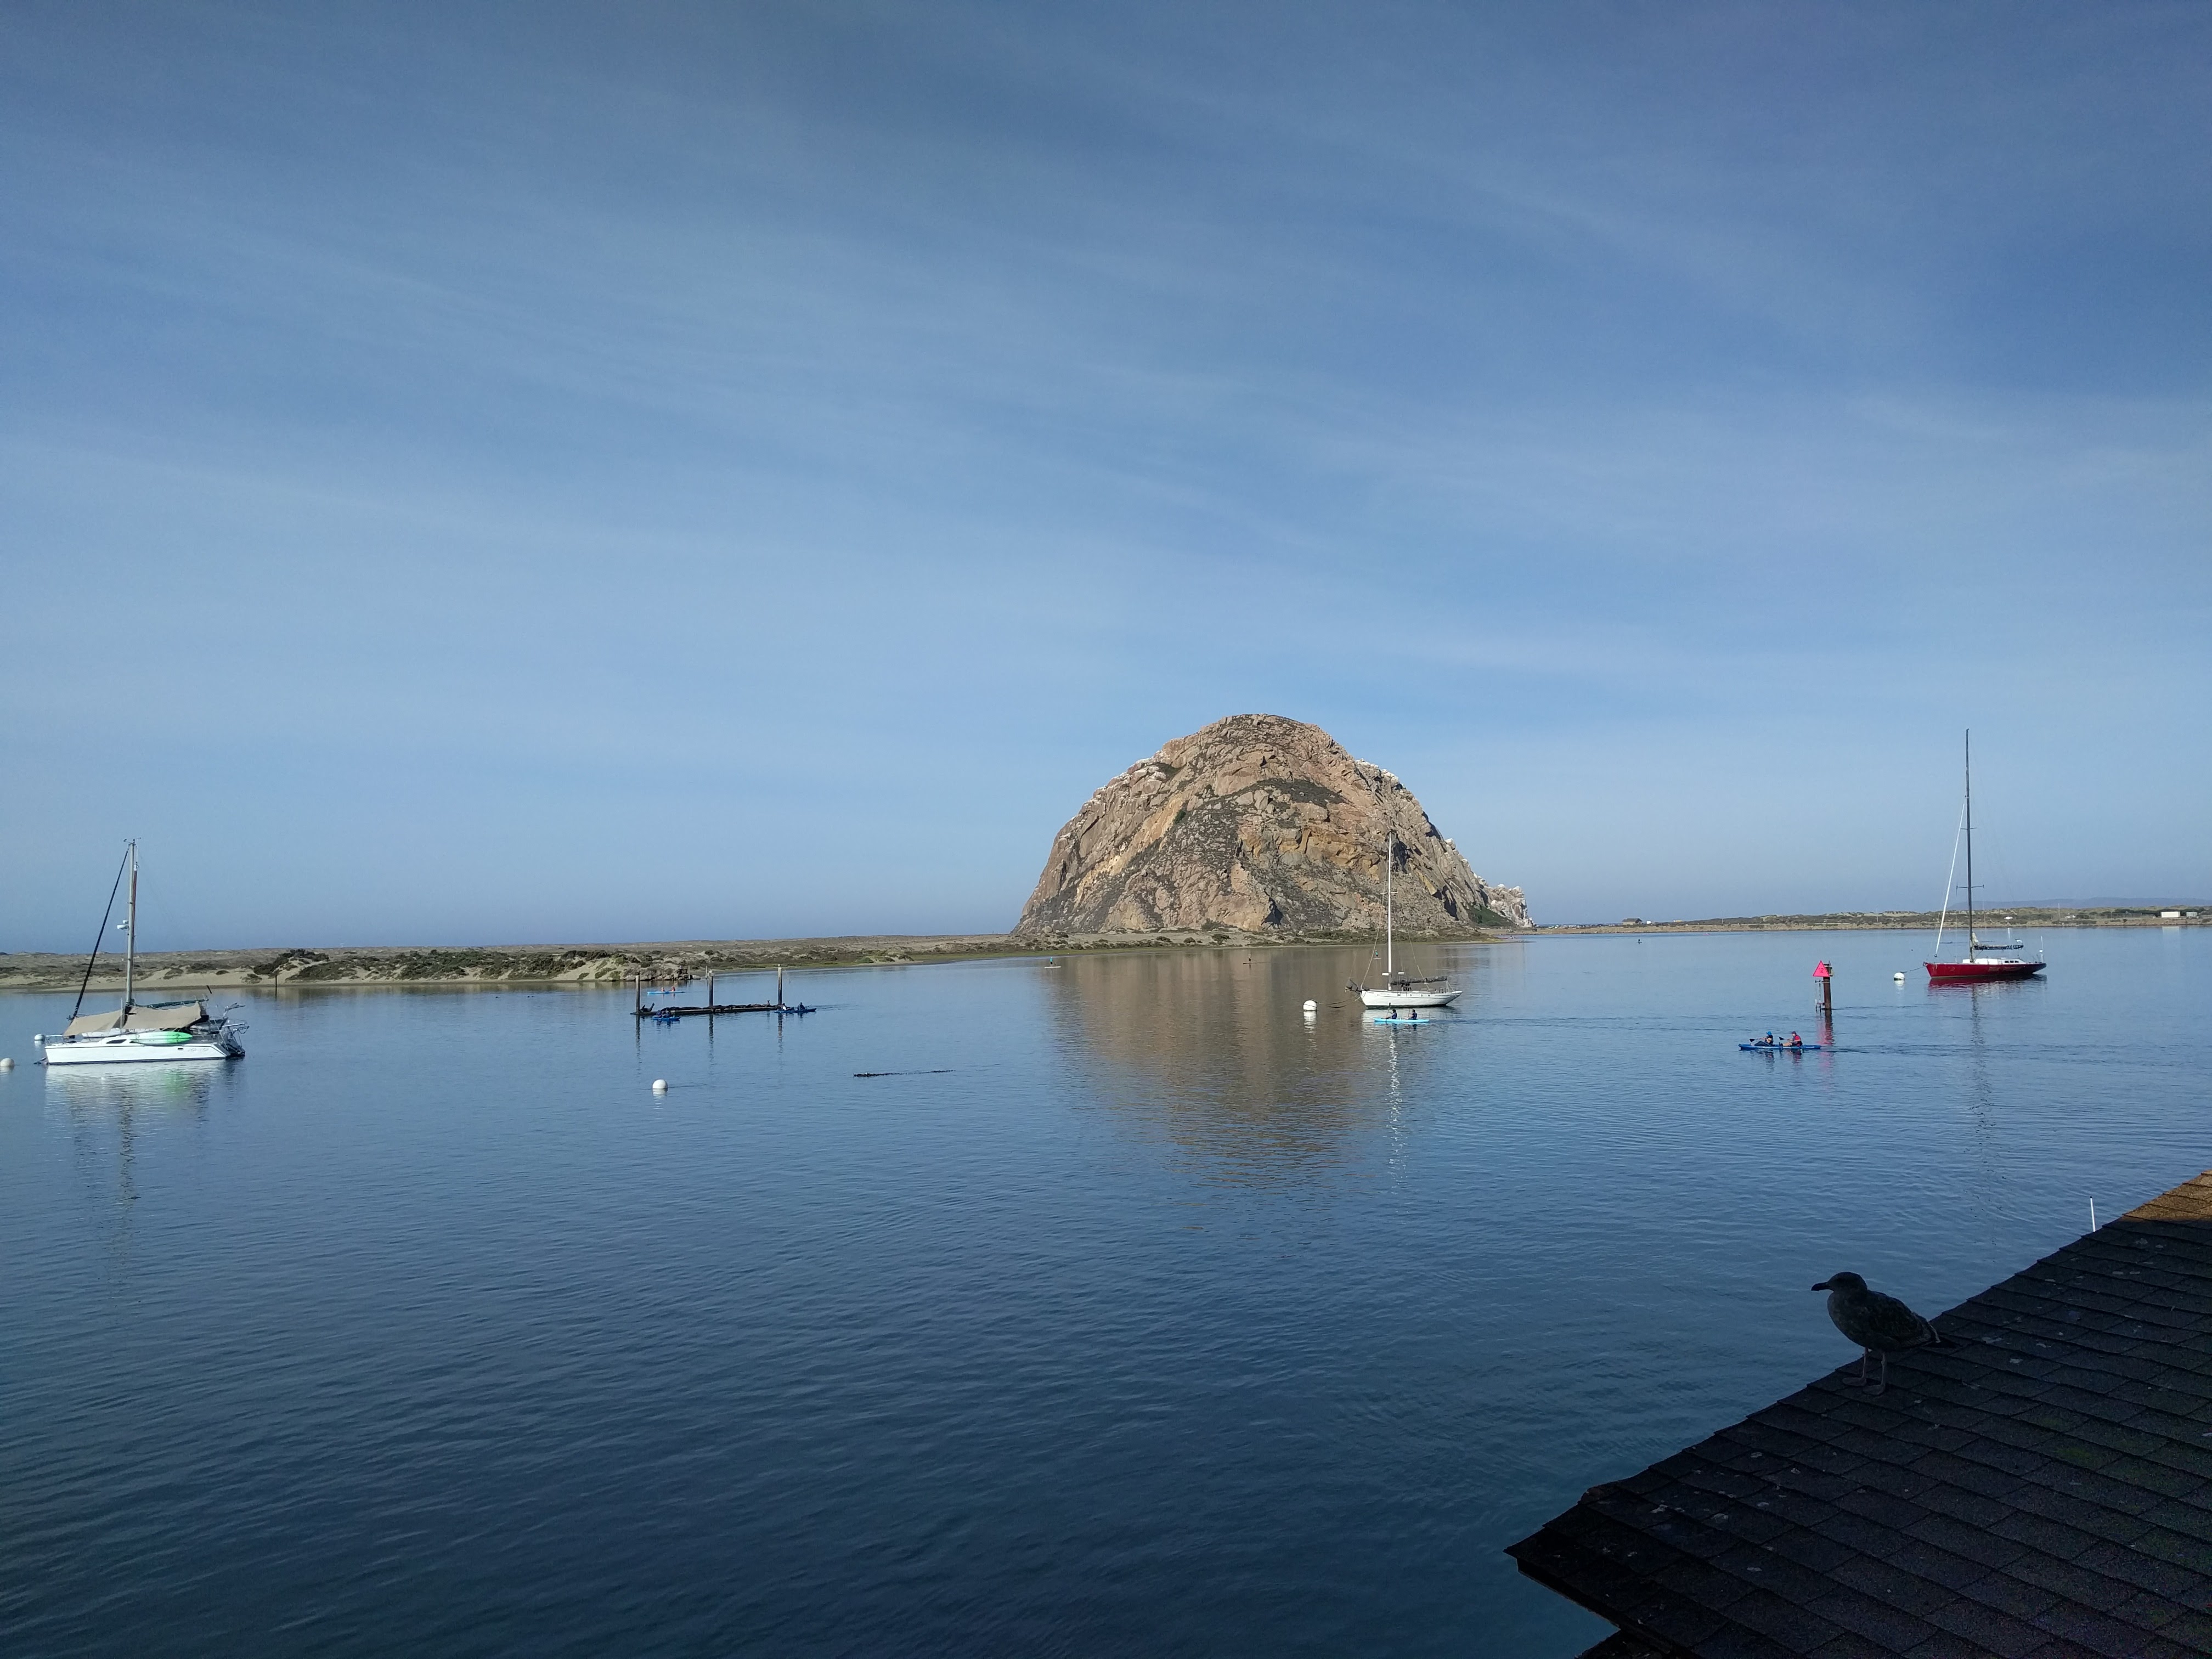 Harbor with boats in it in the foreground. Morro Rock in the background.